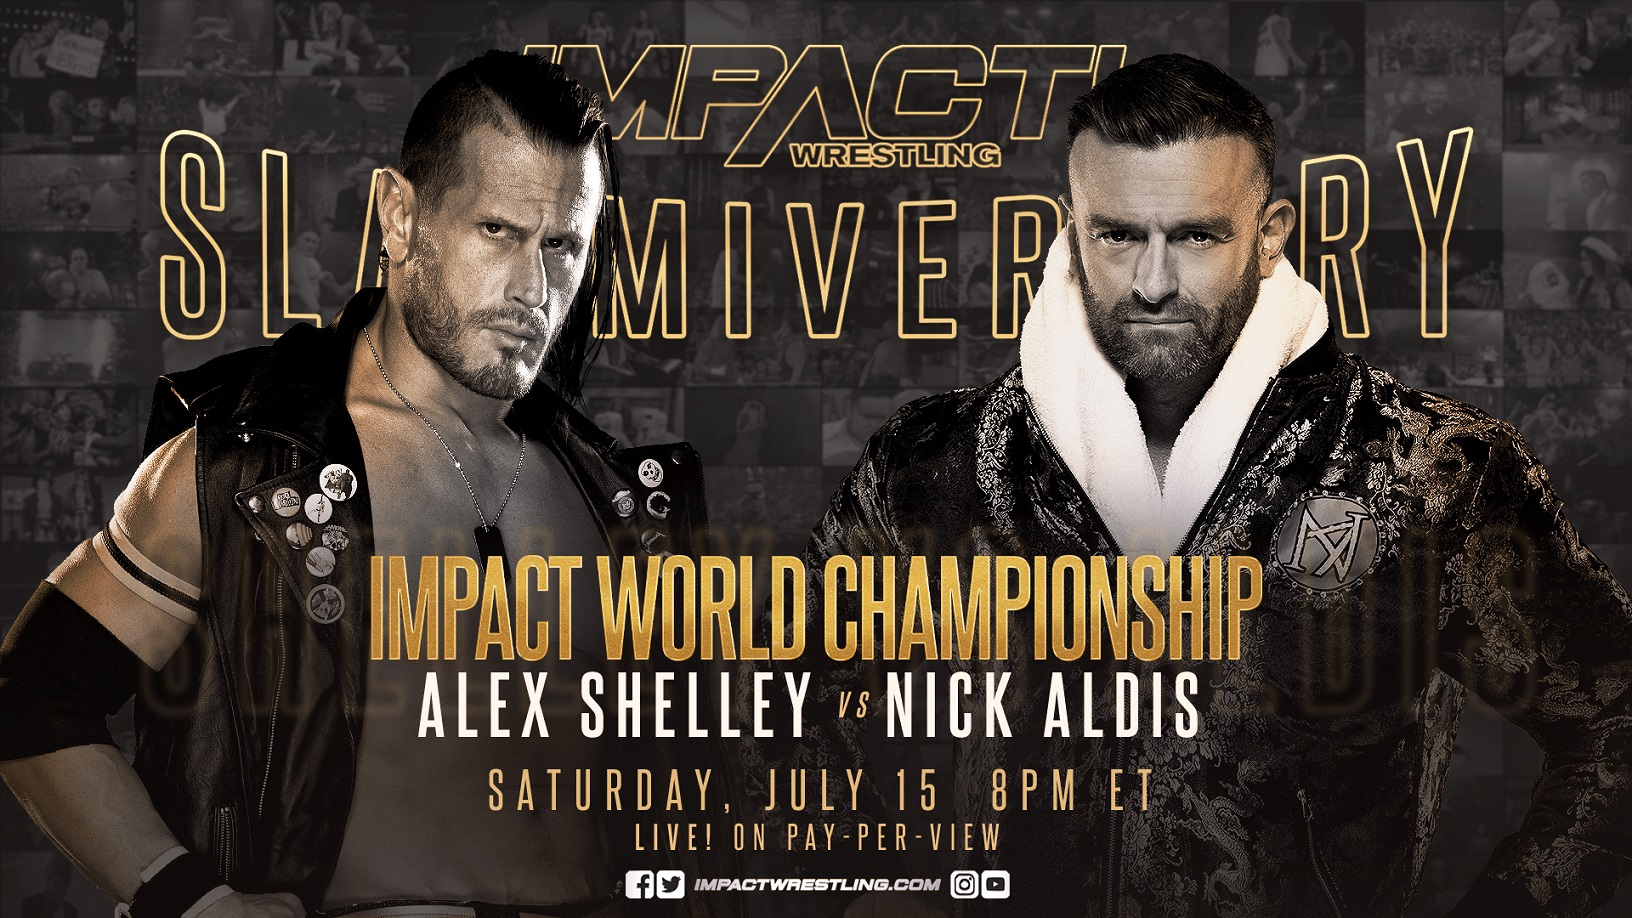 Seismic Shift in IMPACT World Title Picture Leads to Alex Shelley vs Nick Aldis at Slammiversary